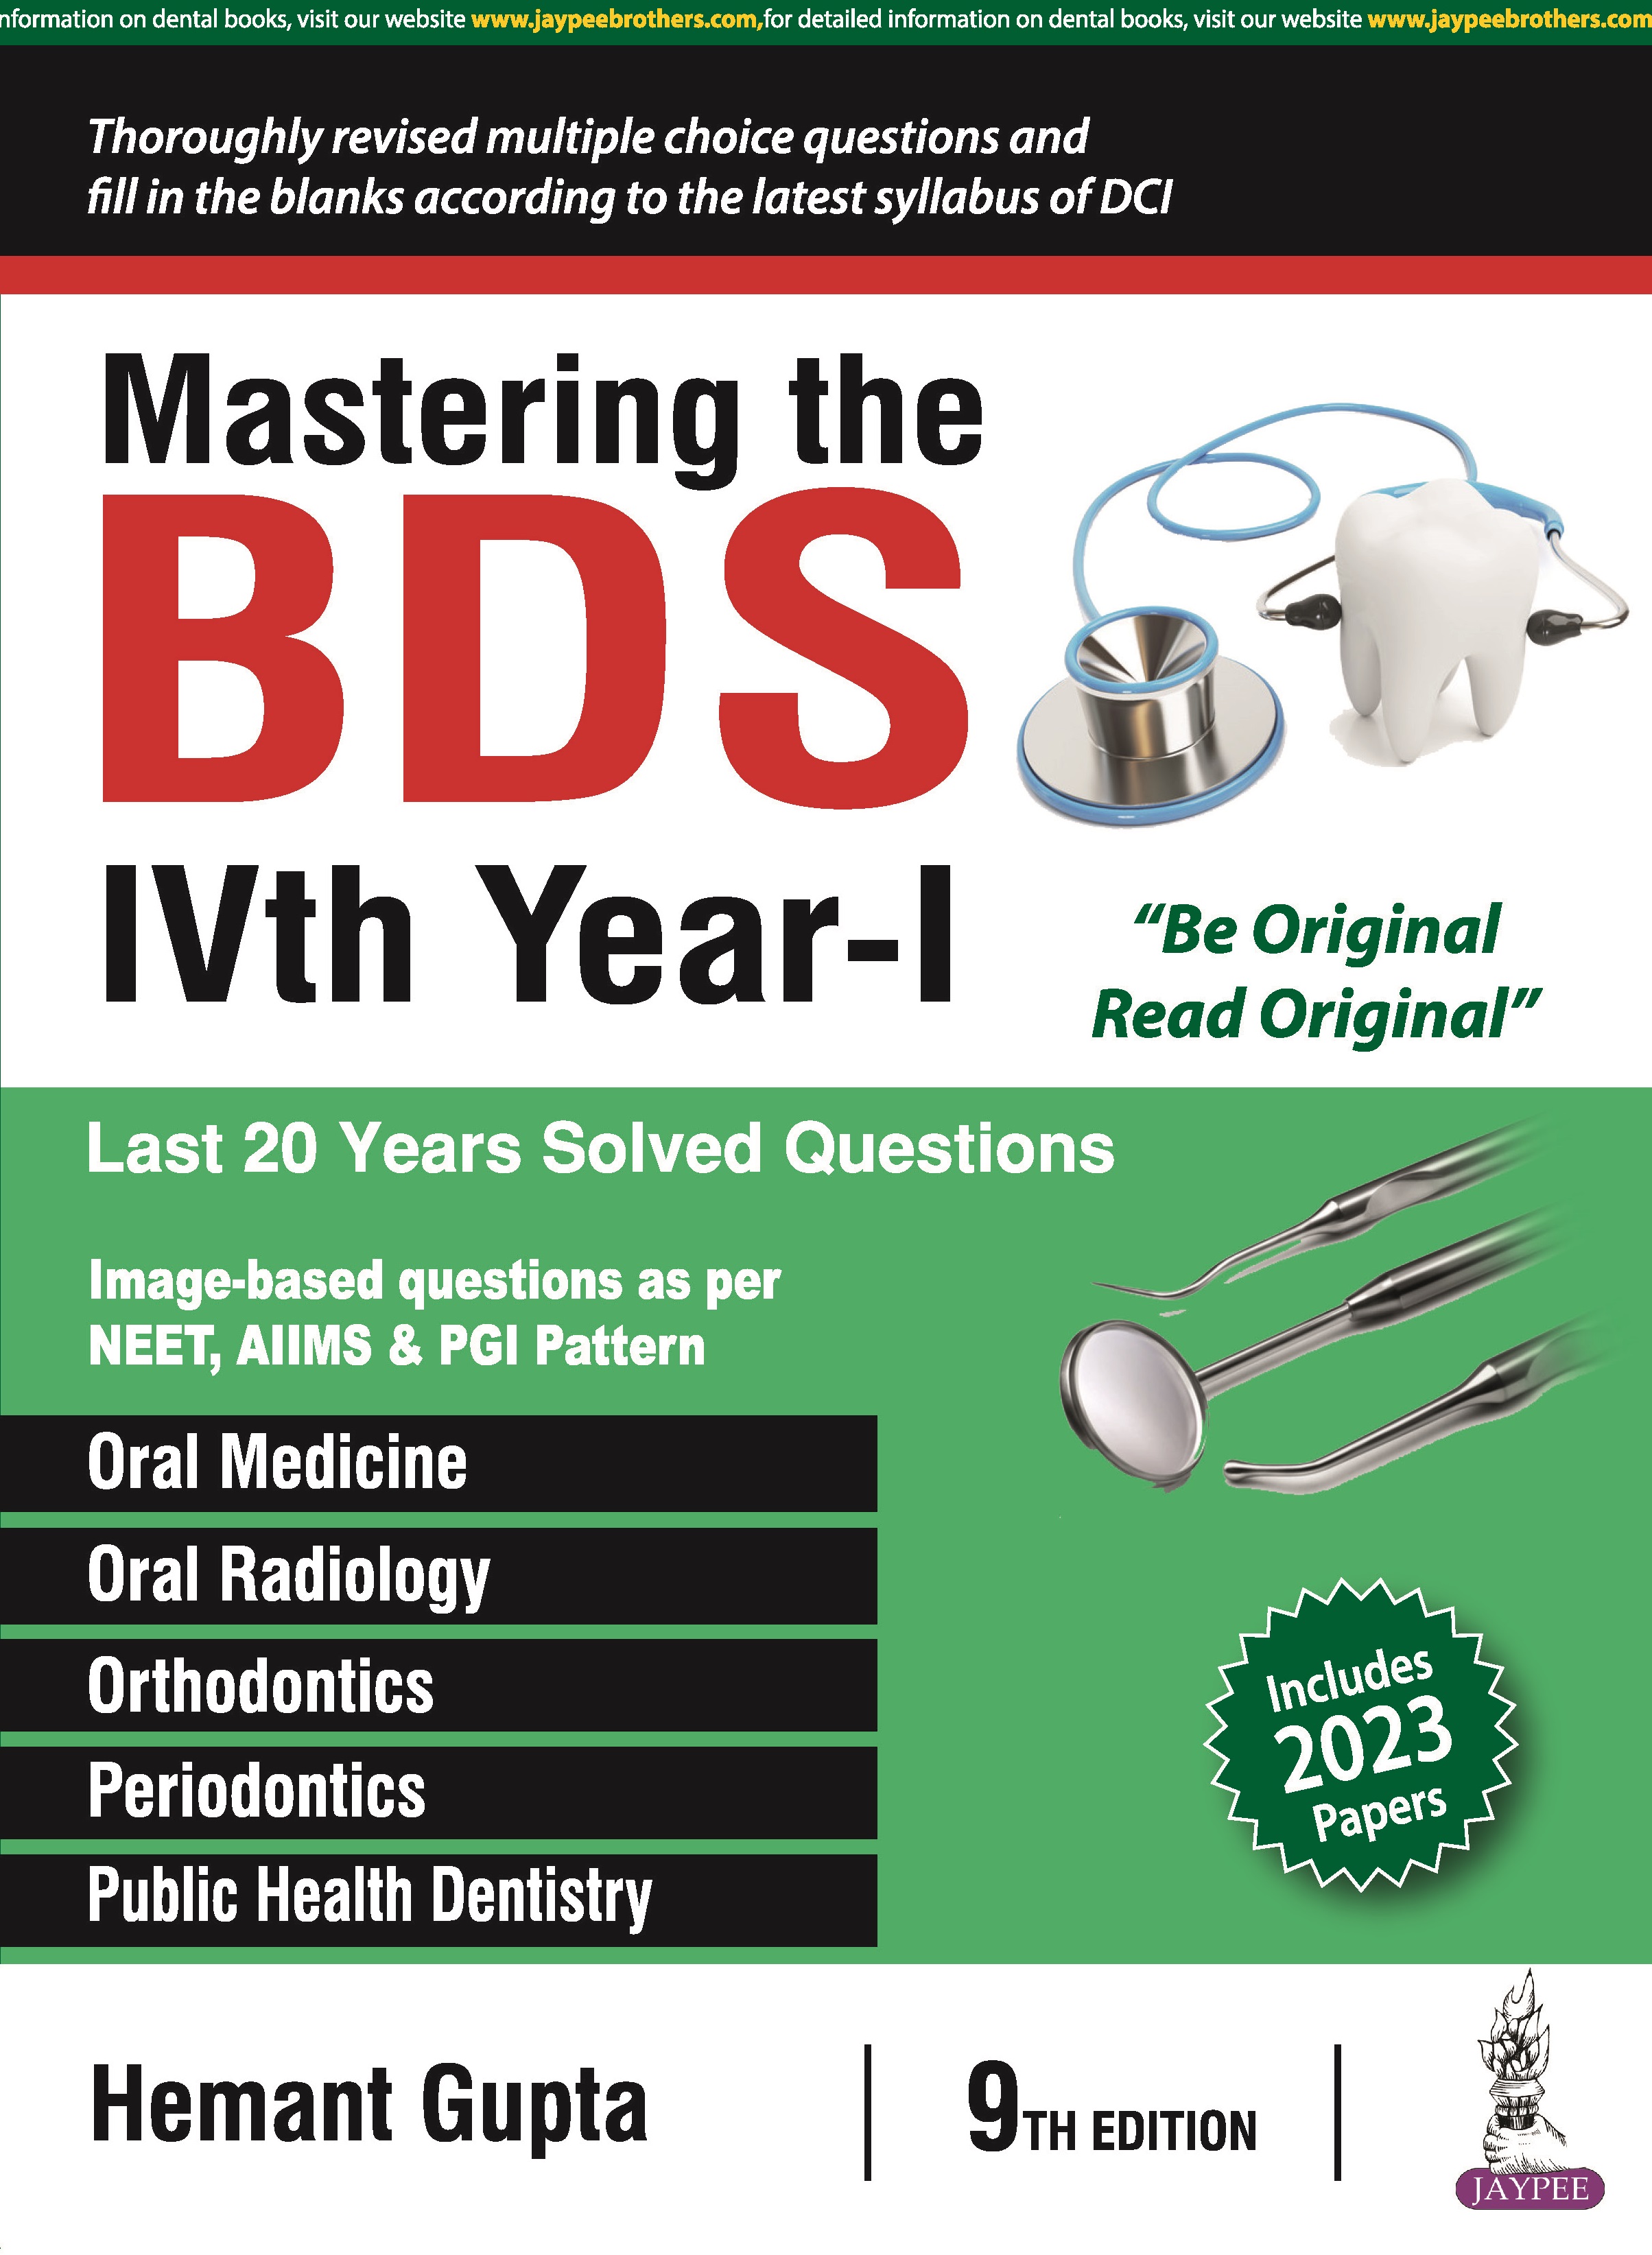 Mastering the BDS IVth Year- I